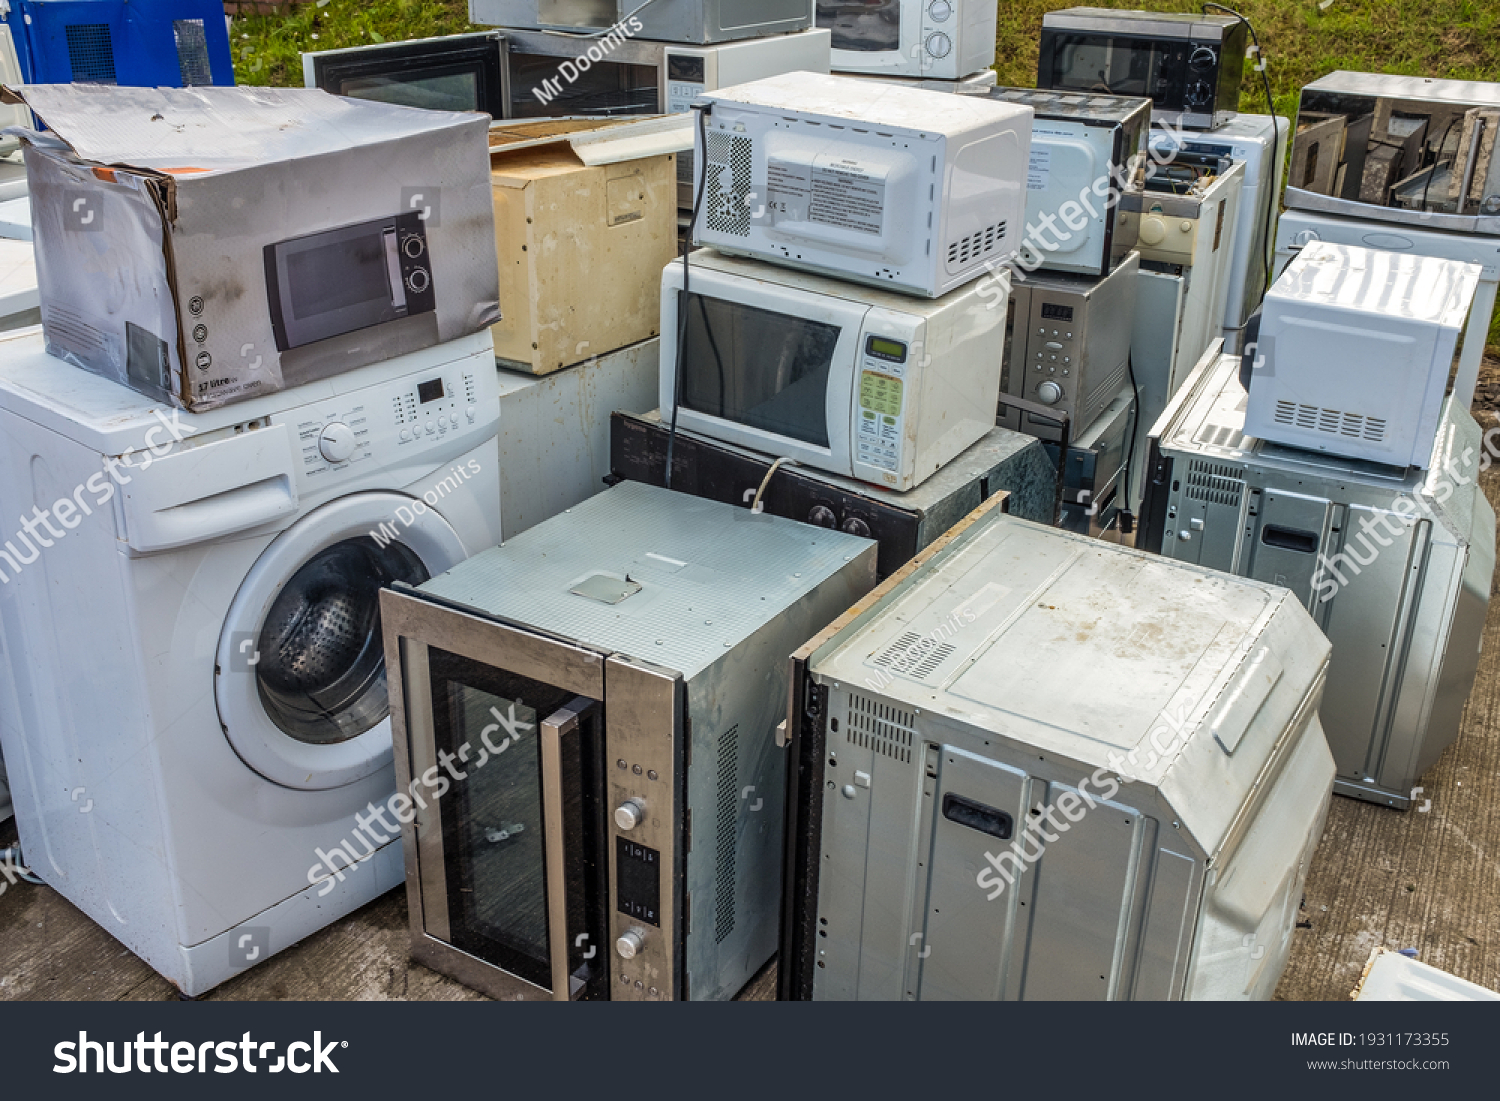 A Collection Of Domestic Applicance (Ovens, Microwaves And Washing Machines) Left At A Dump Or Recycling Center #1931173355